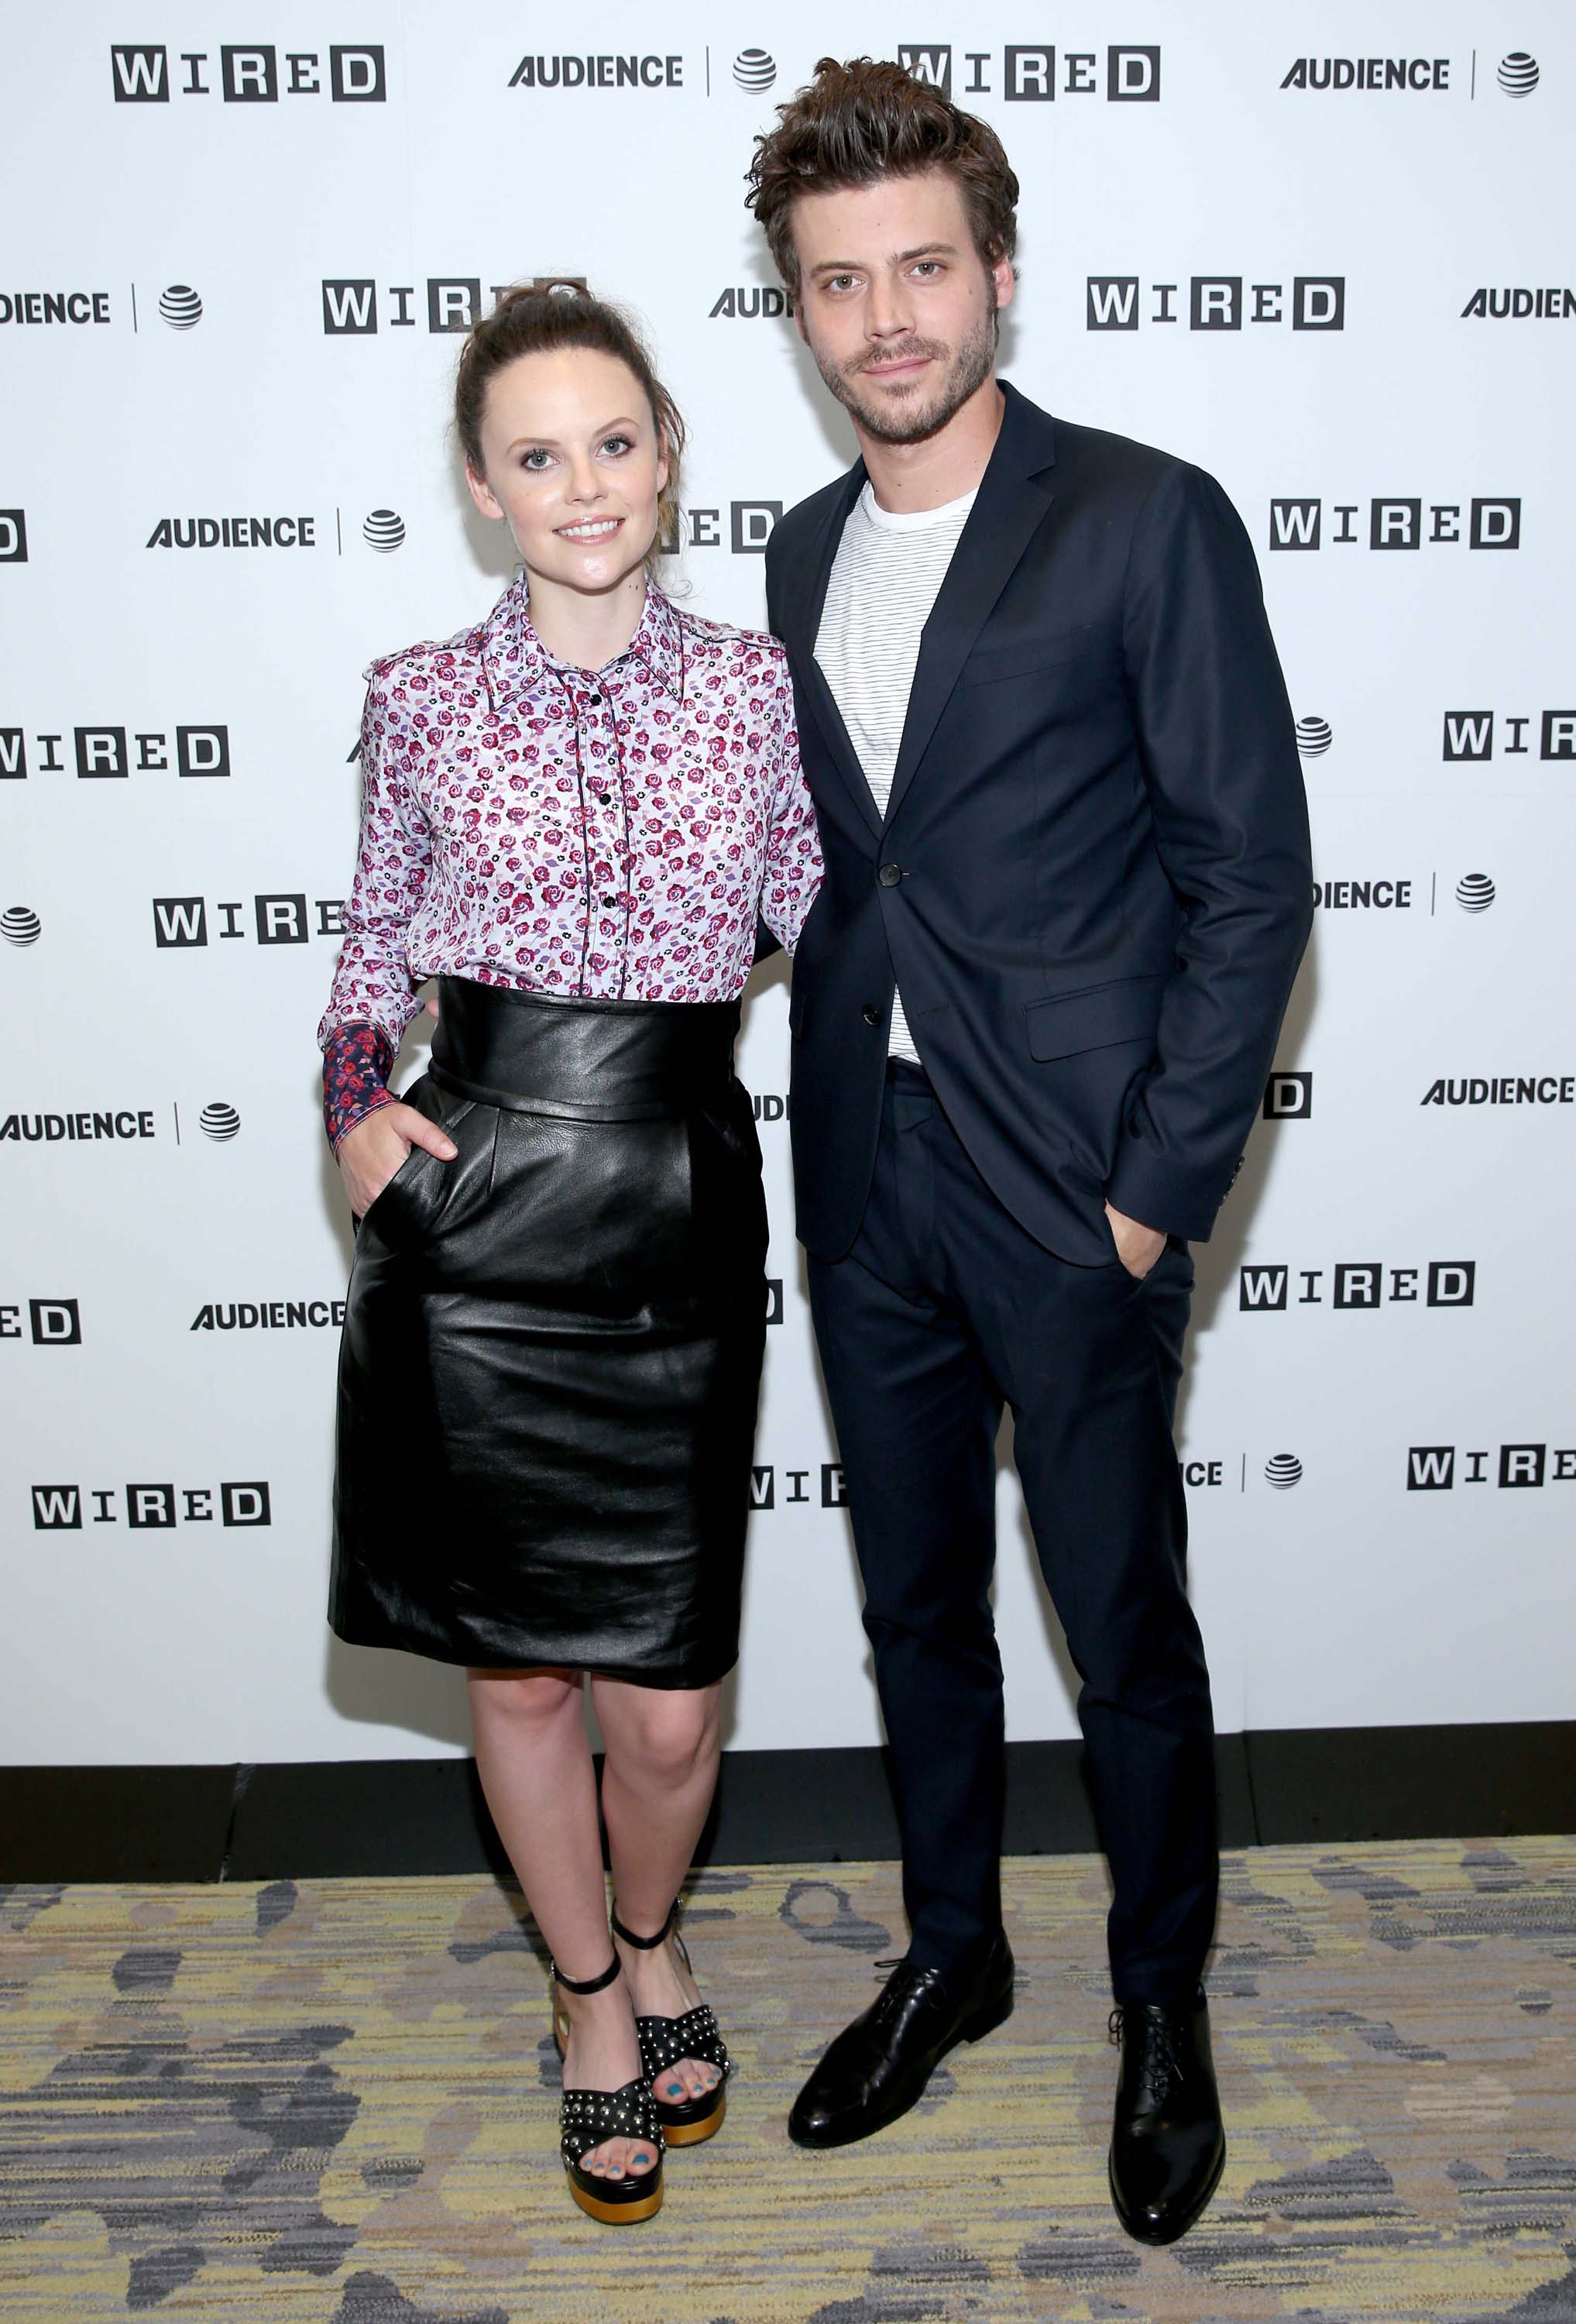 Sarah Ramos attends the WIRED Cafe